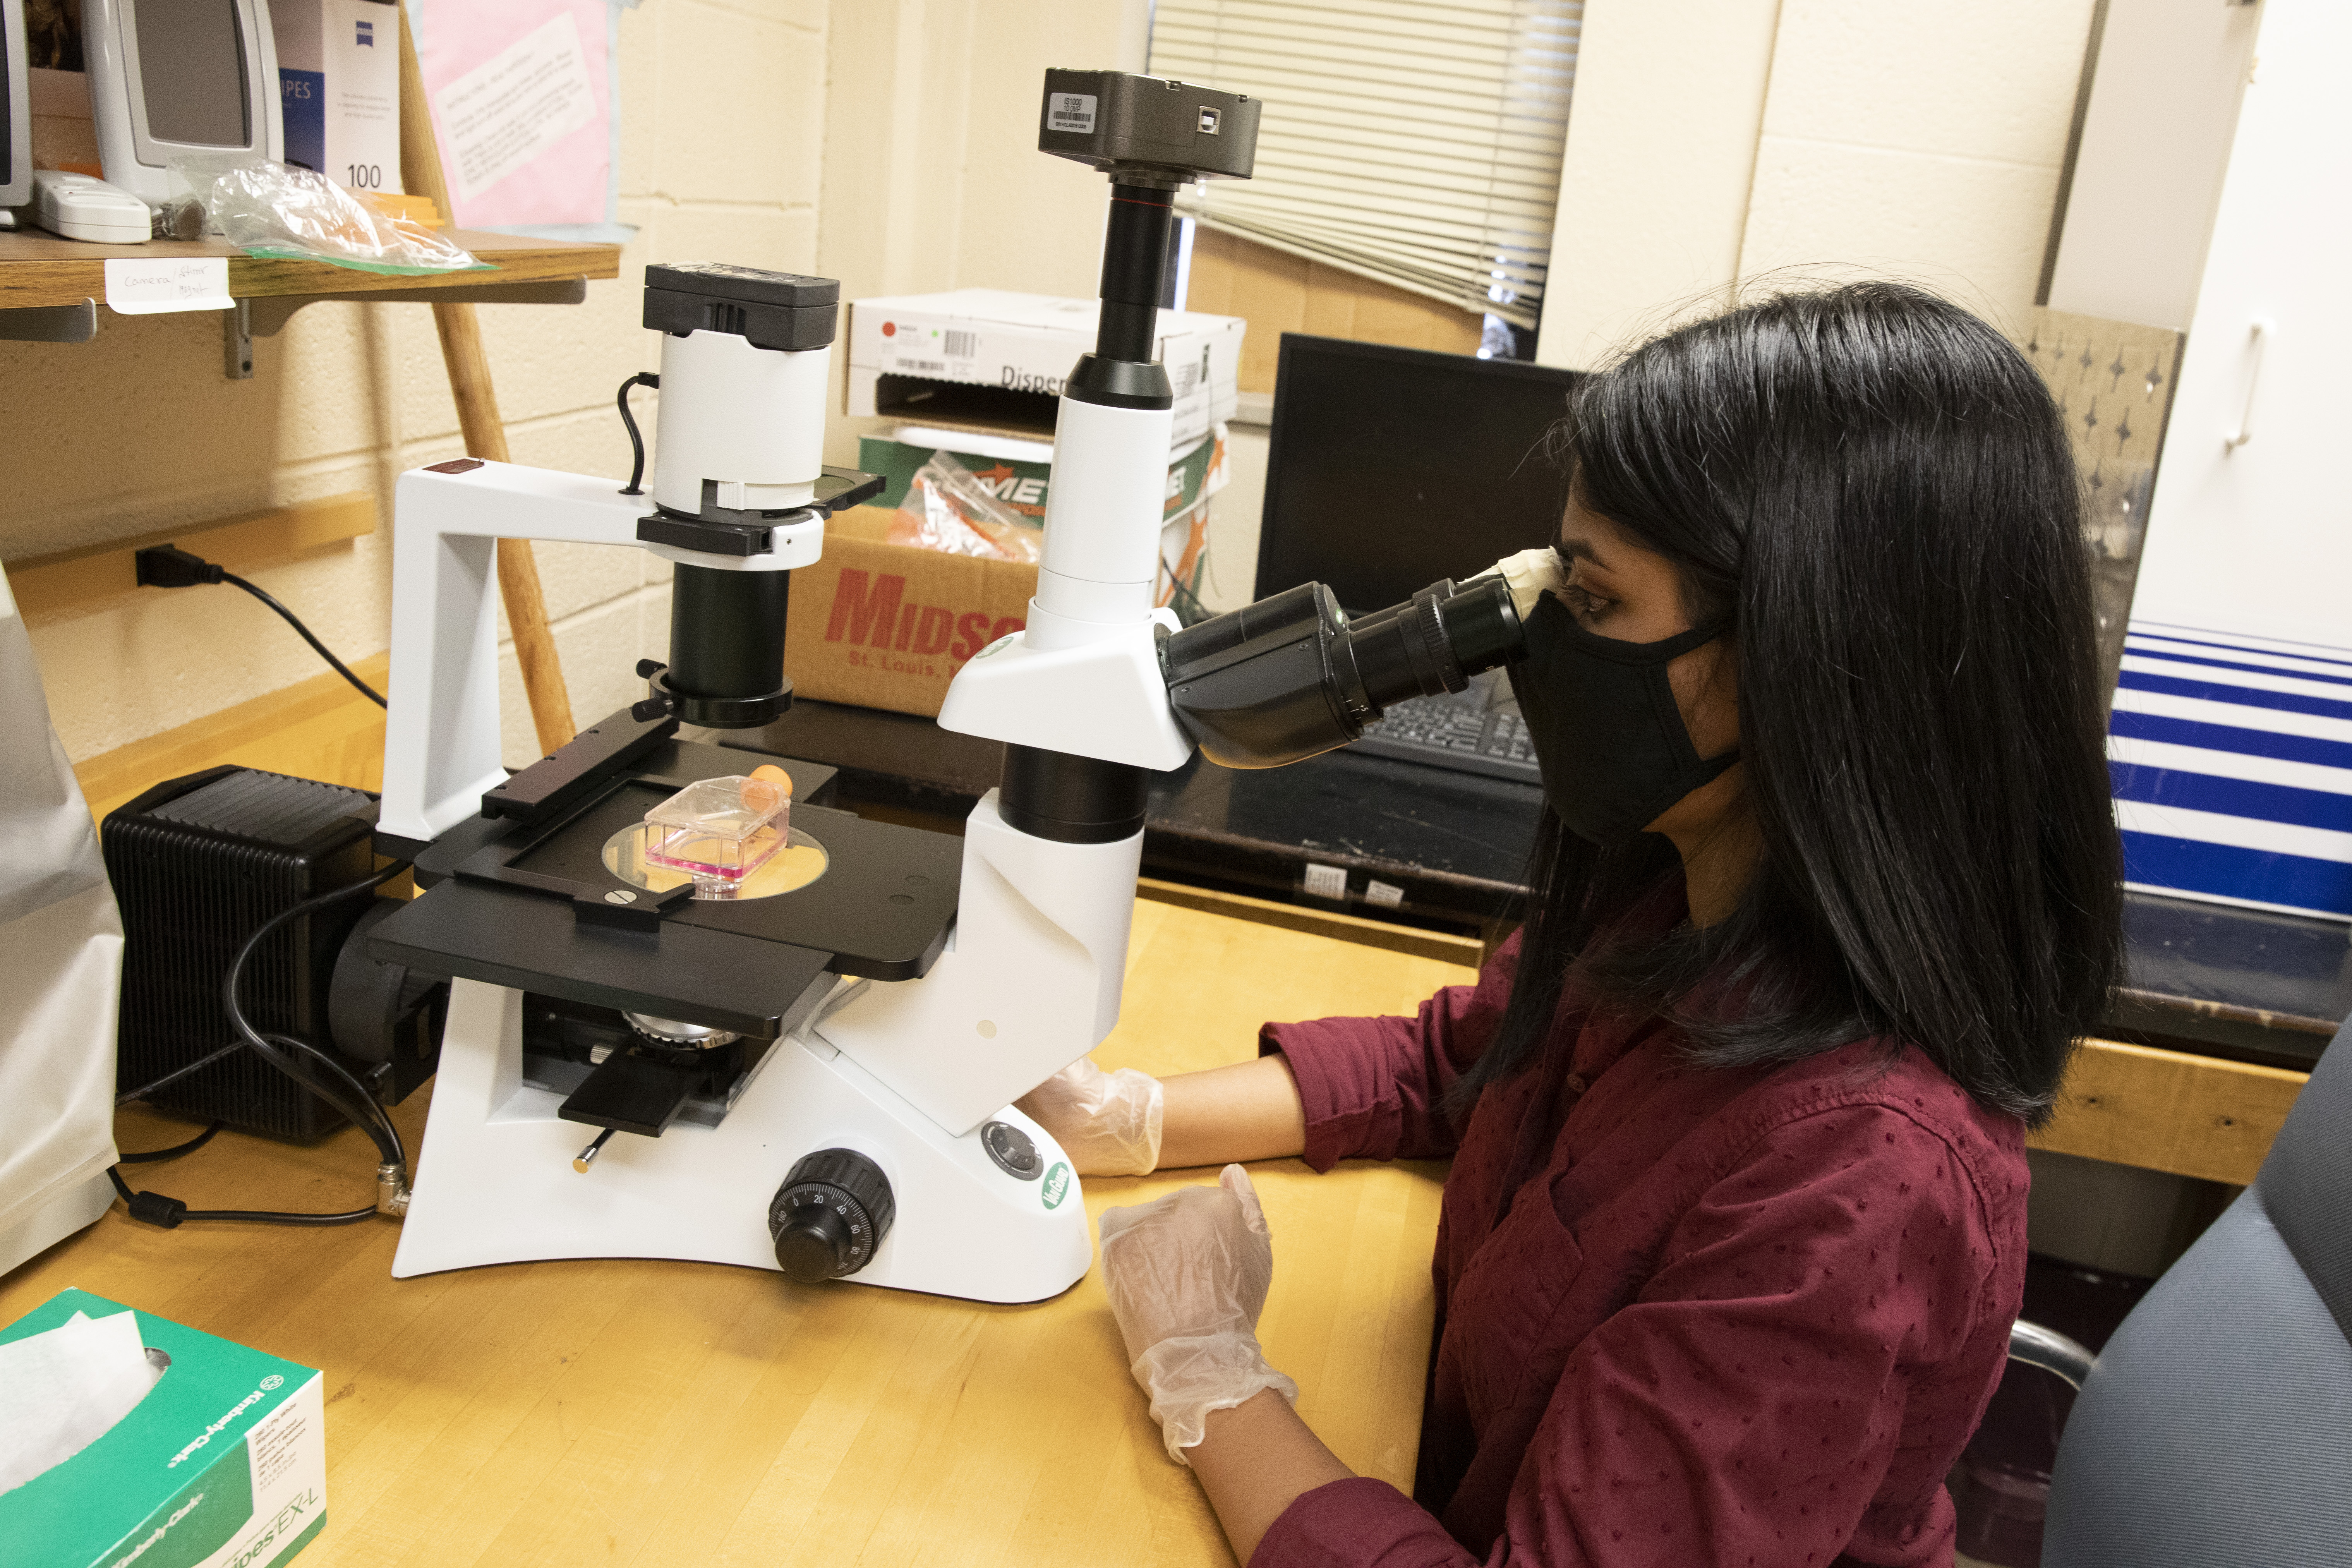 A student wearing a mask examines something under a microscope.